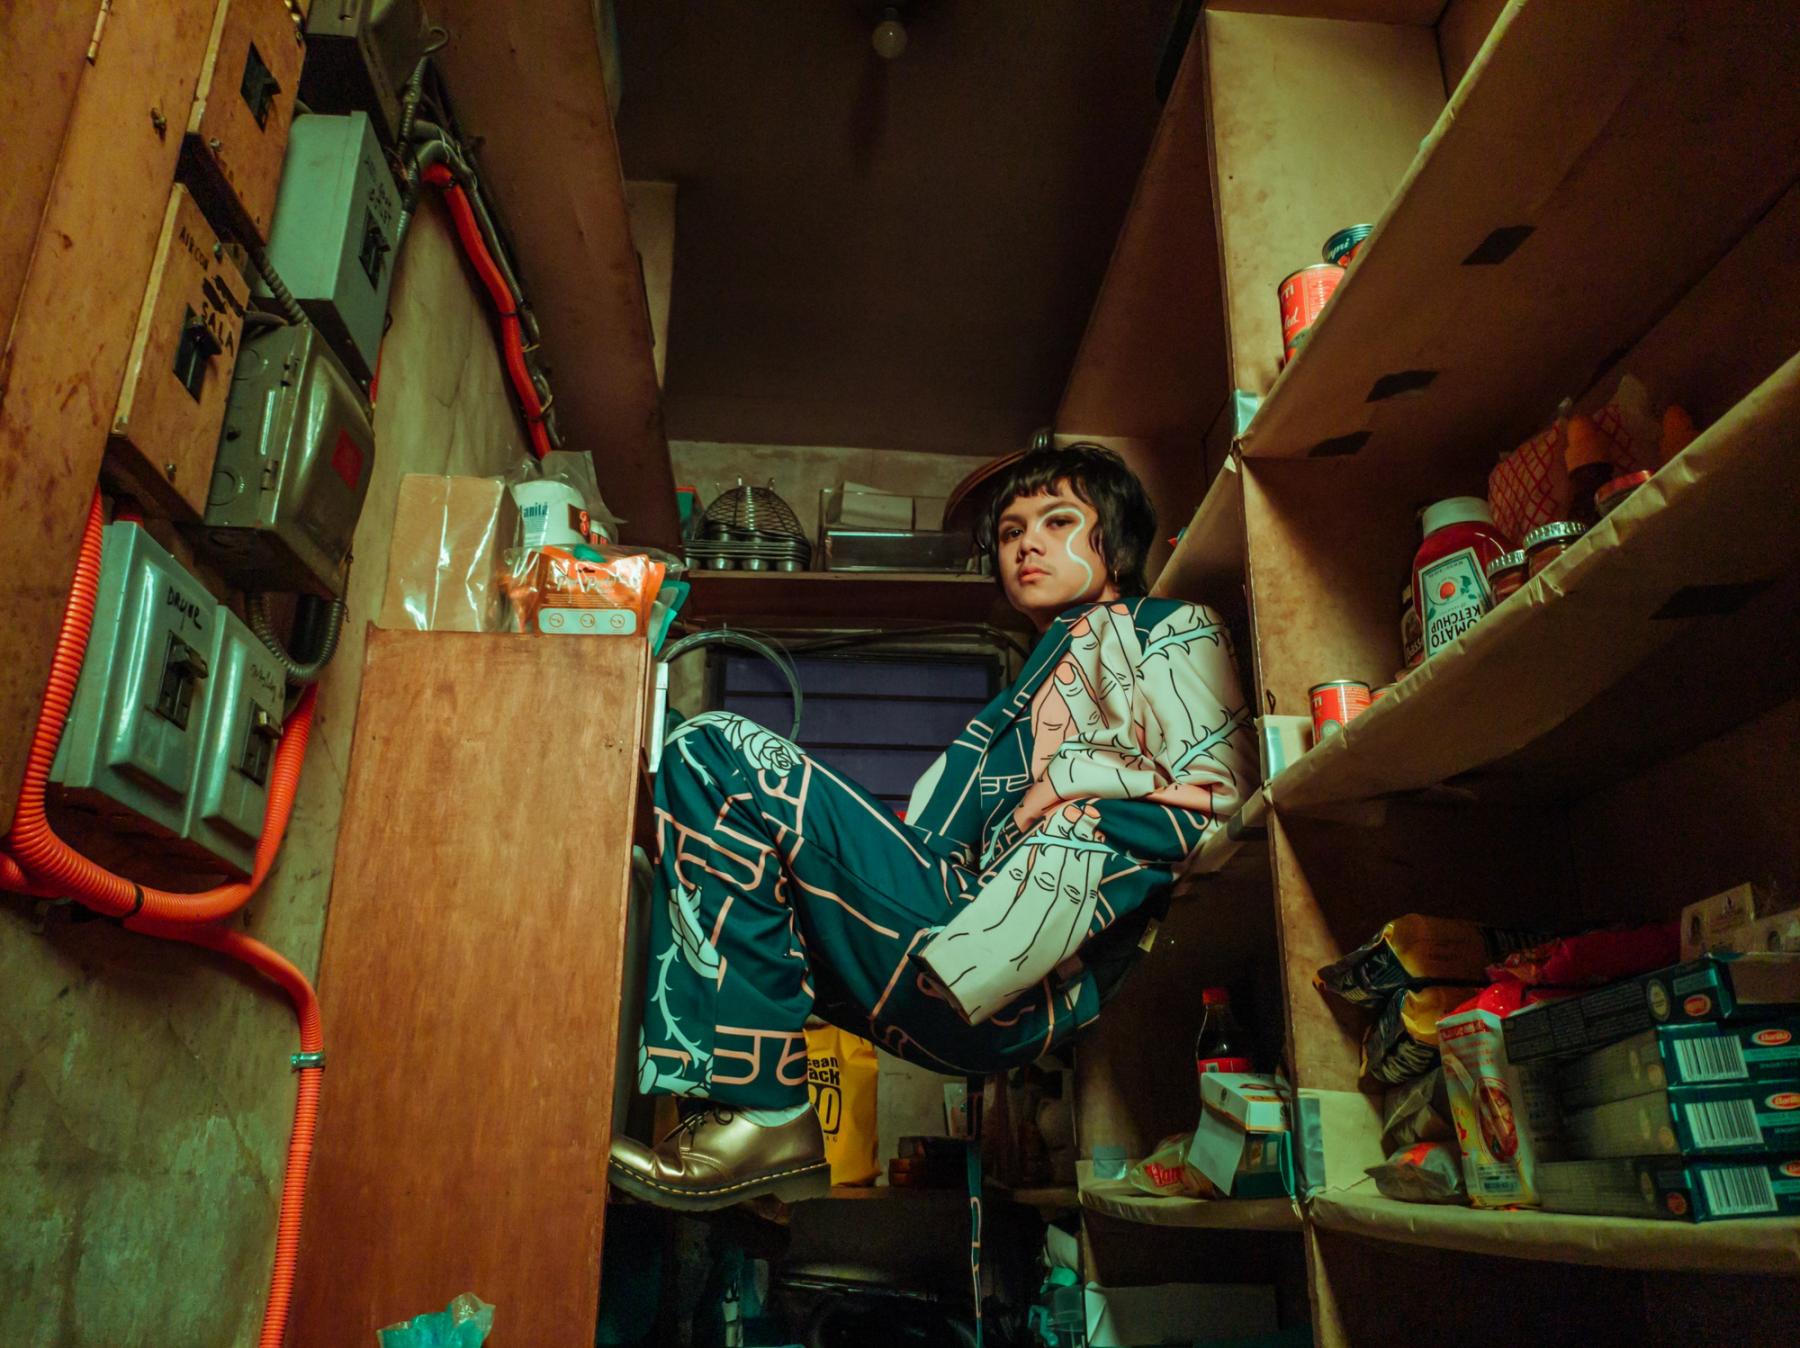 Zild is perched between pantry shelves in a greenish light